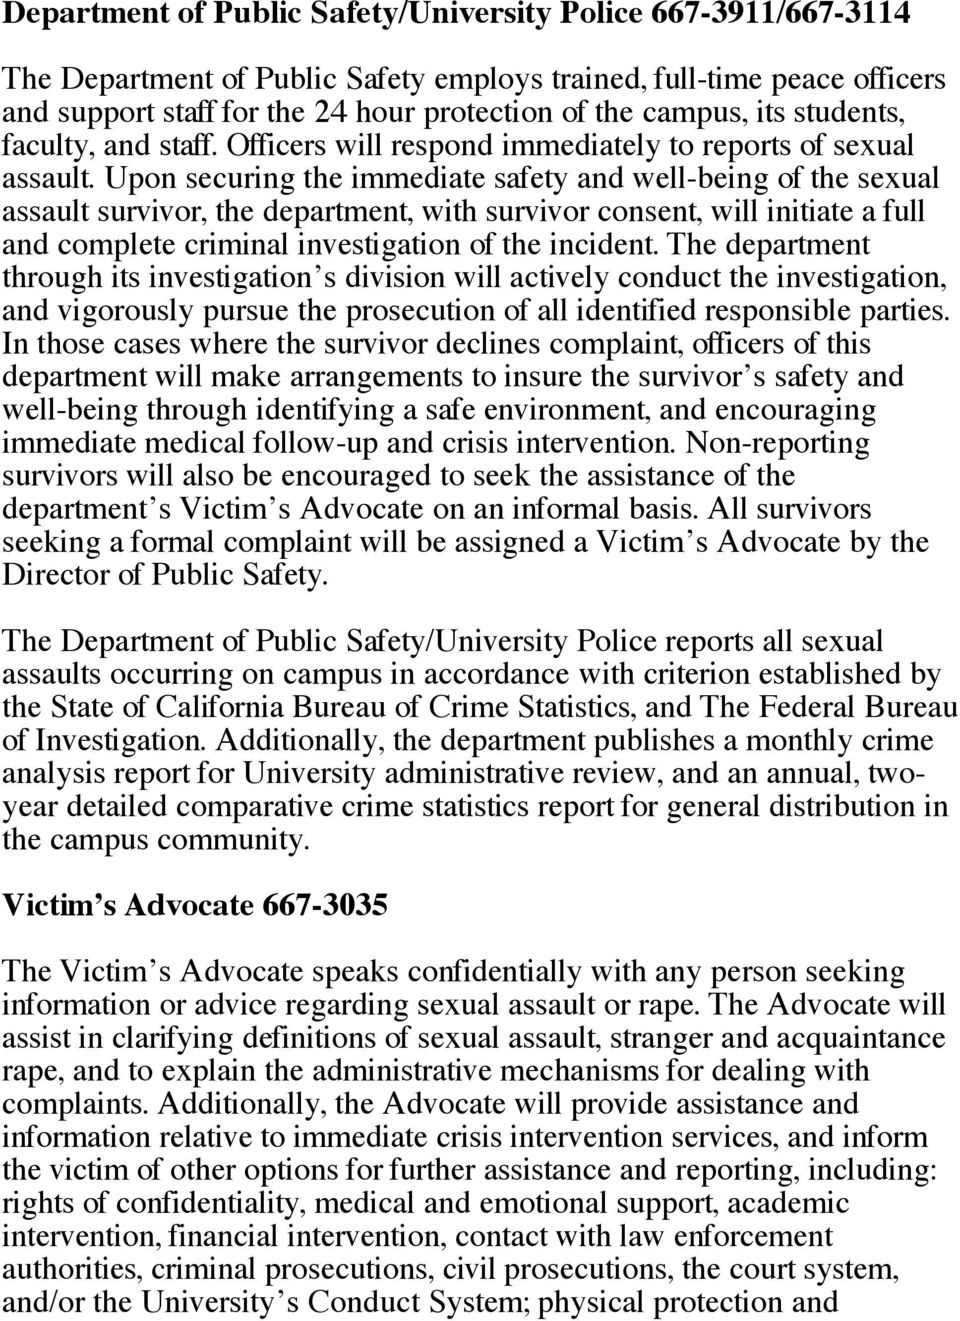 Upon securing the immediate safety and well-being of the sexual assault survivor, the department, with survivor consent, will initiate a full and complete criminal investigation of the incident.